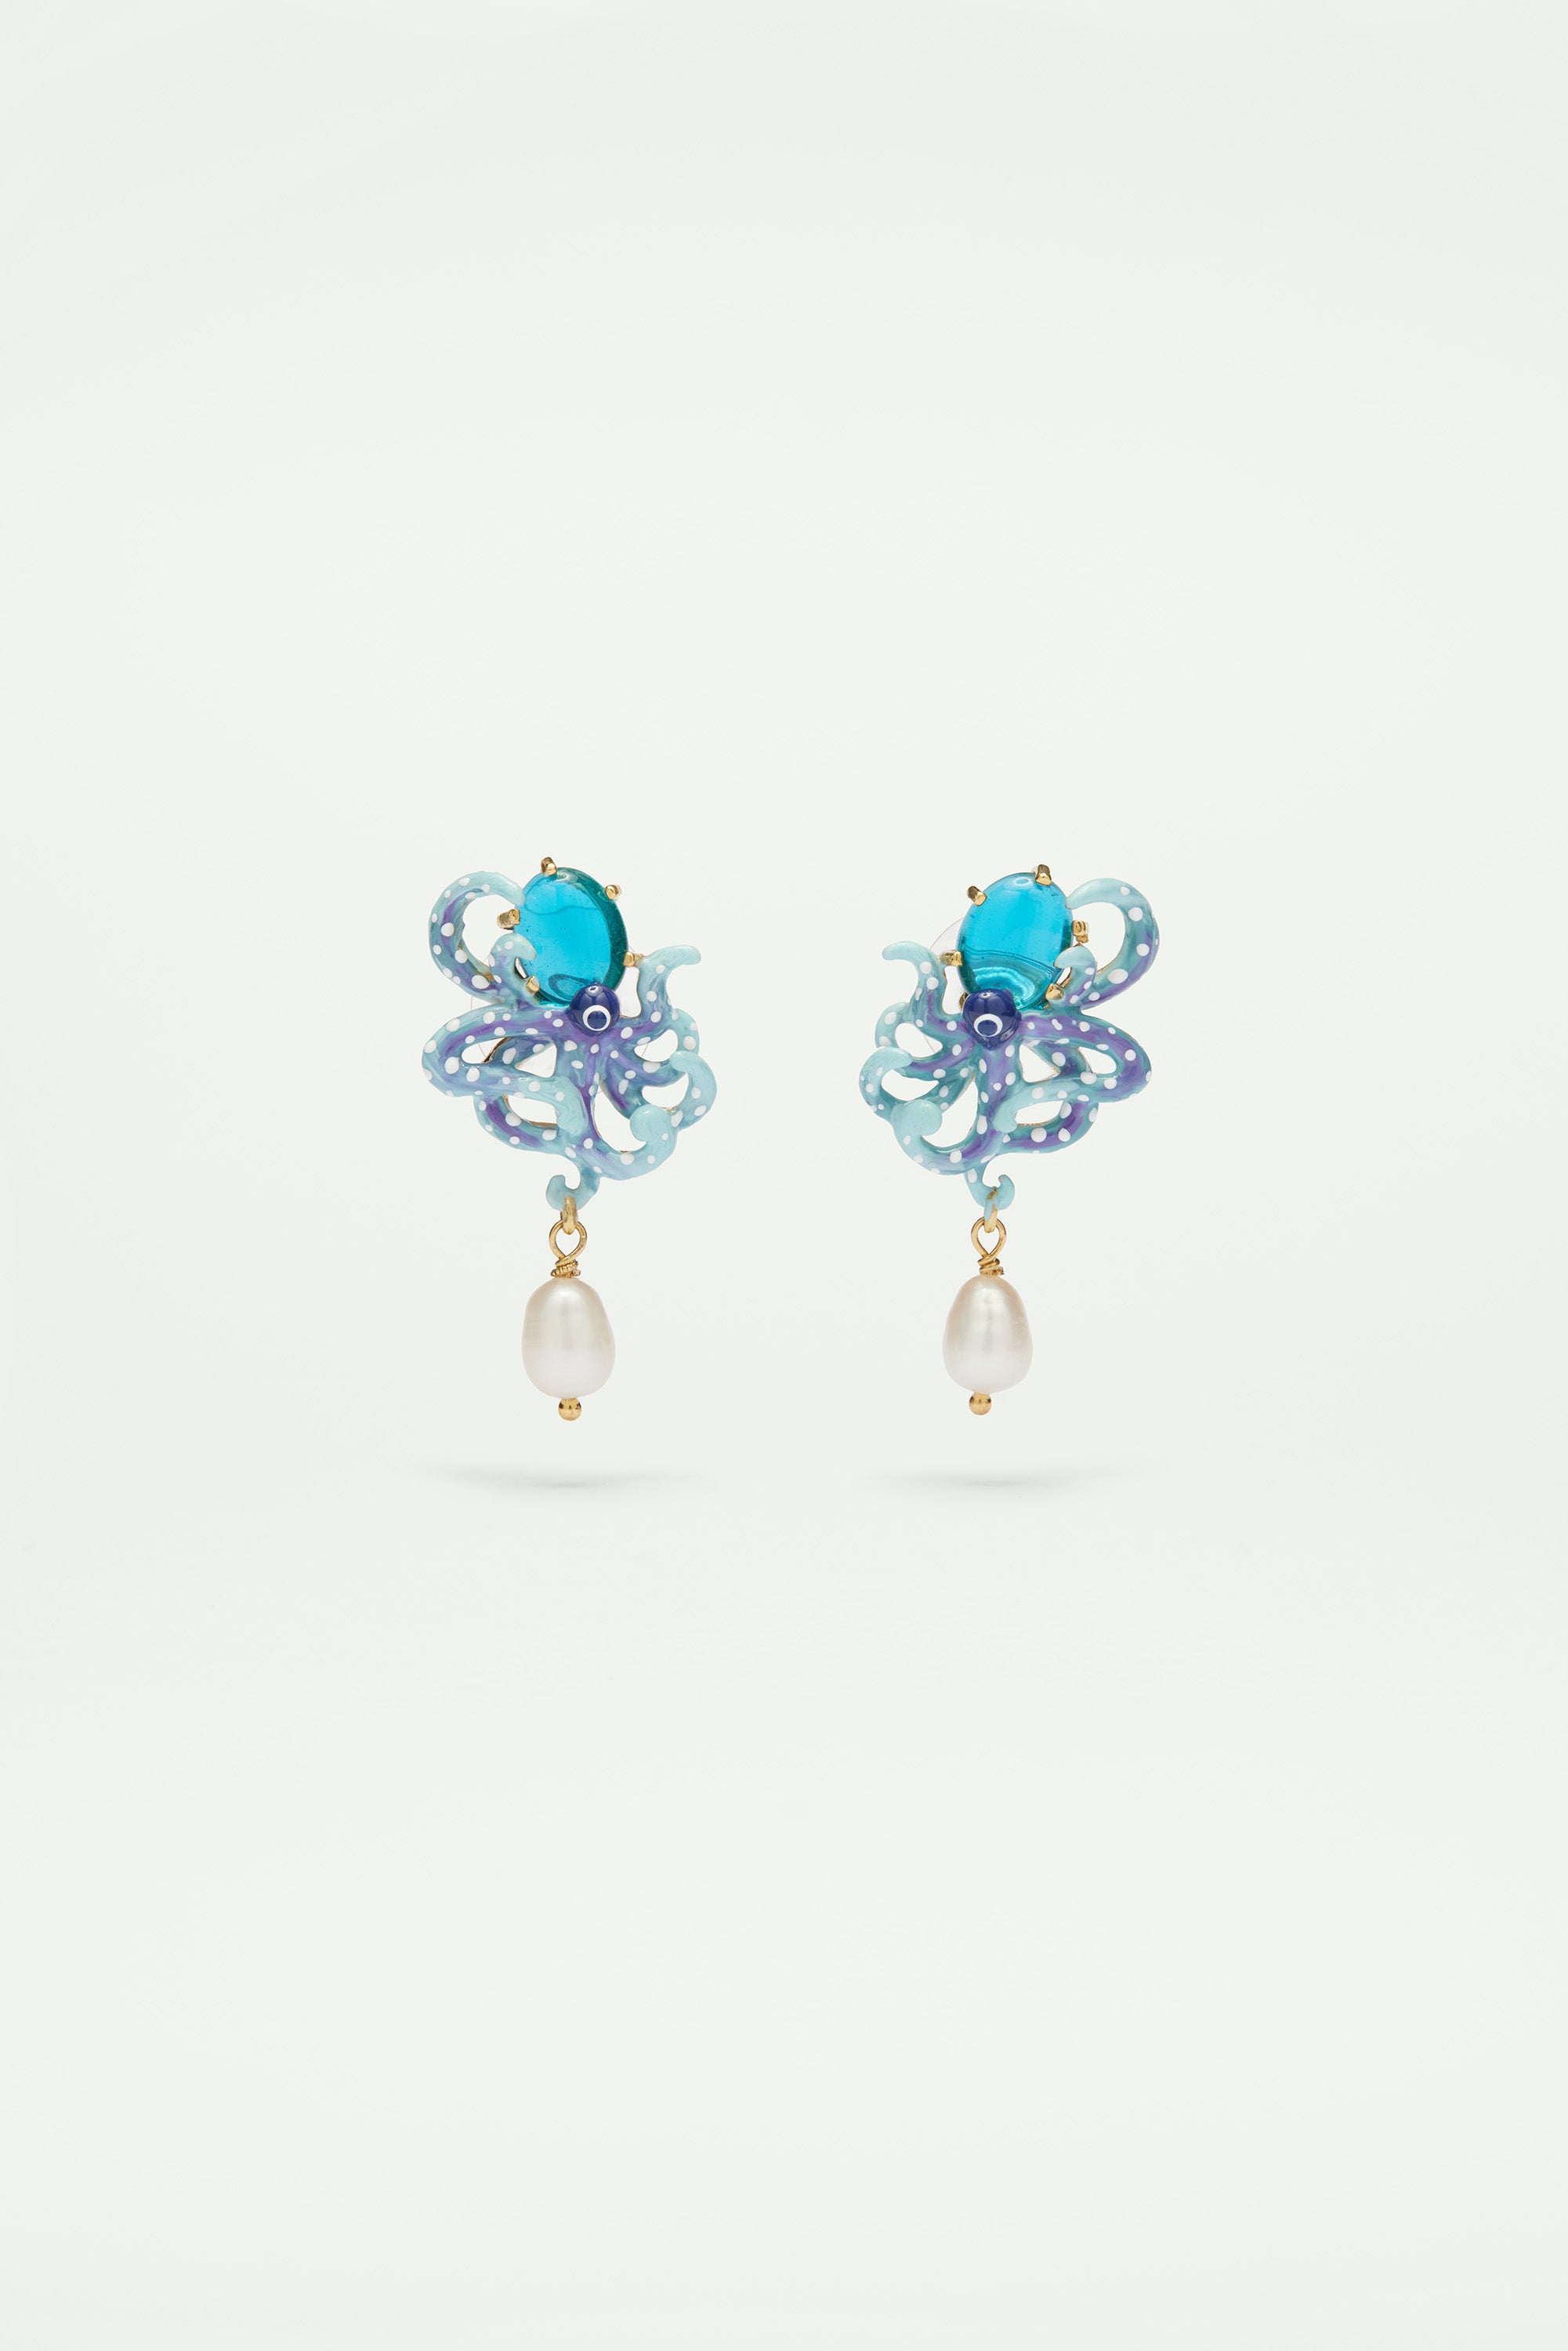 Enamelled blue octopus, blue cut glass stone and mother of pearl bead post earrings